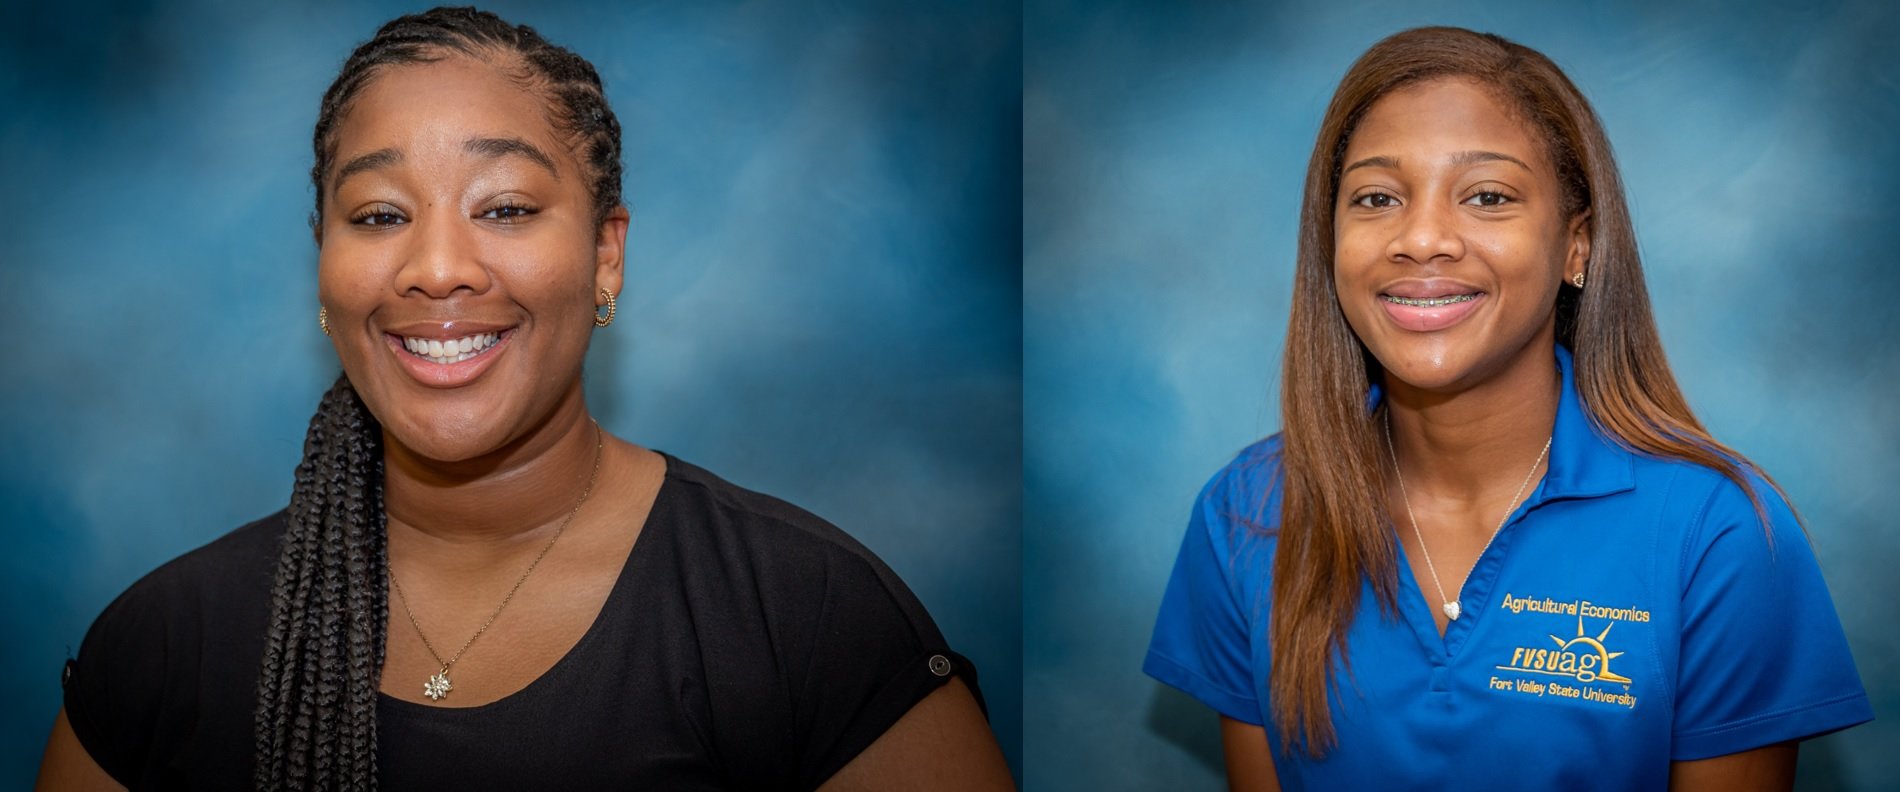 The National Crop Insurance Services (NCIS) recently awarded $3,000 each to Fort Valley State University students Faith Fantroy (left) and Charity Greene (right).